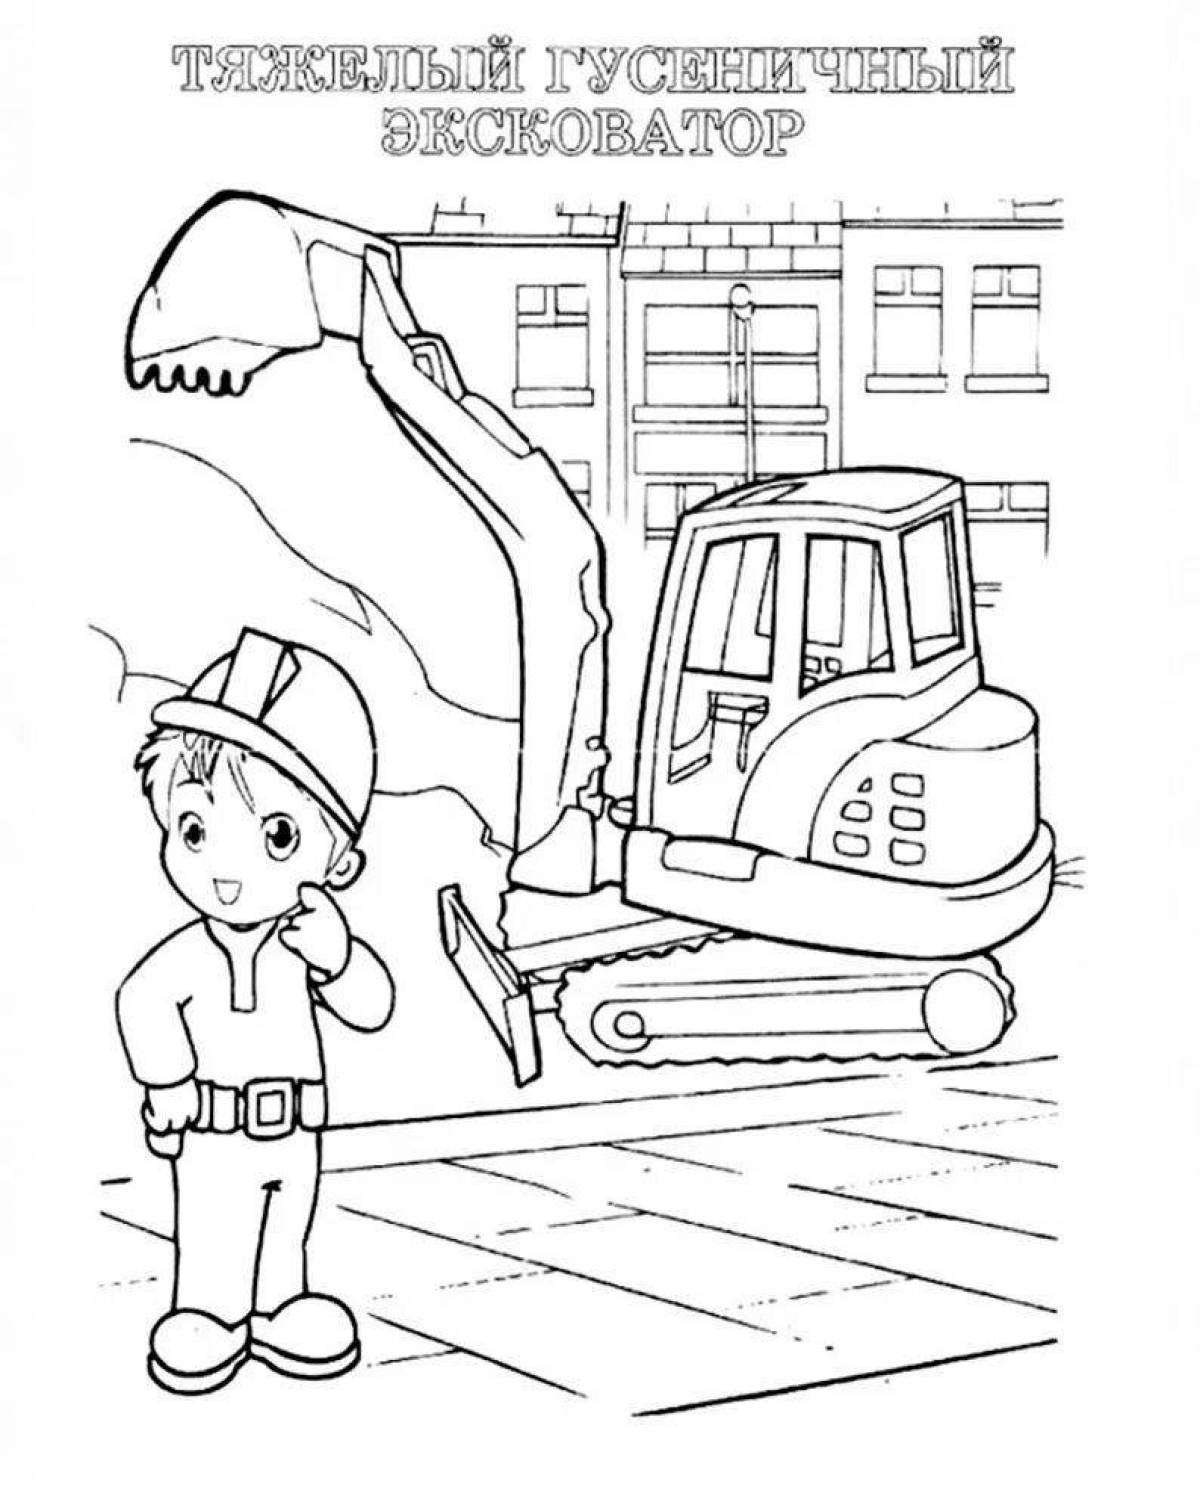 Occupational safety drawings through the eyes of children #7